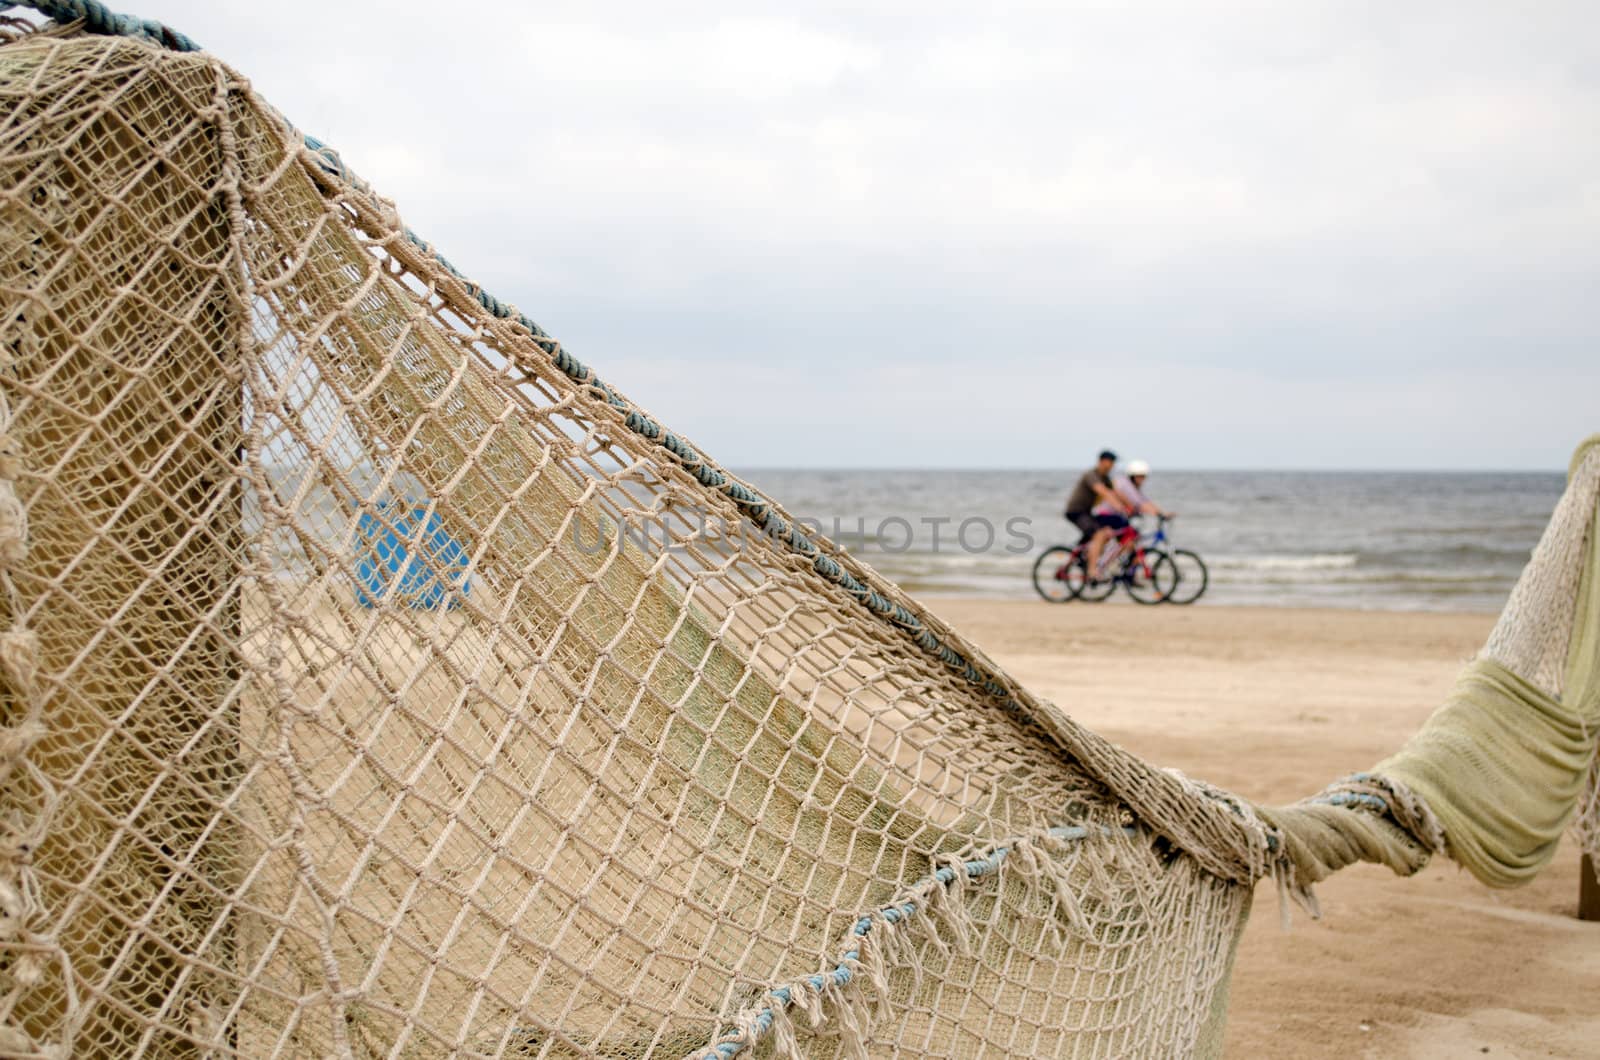 Beach fence decorated with net and cyclists going on sea shore coastline.